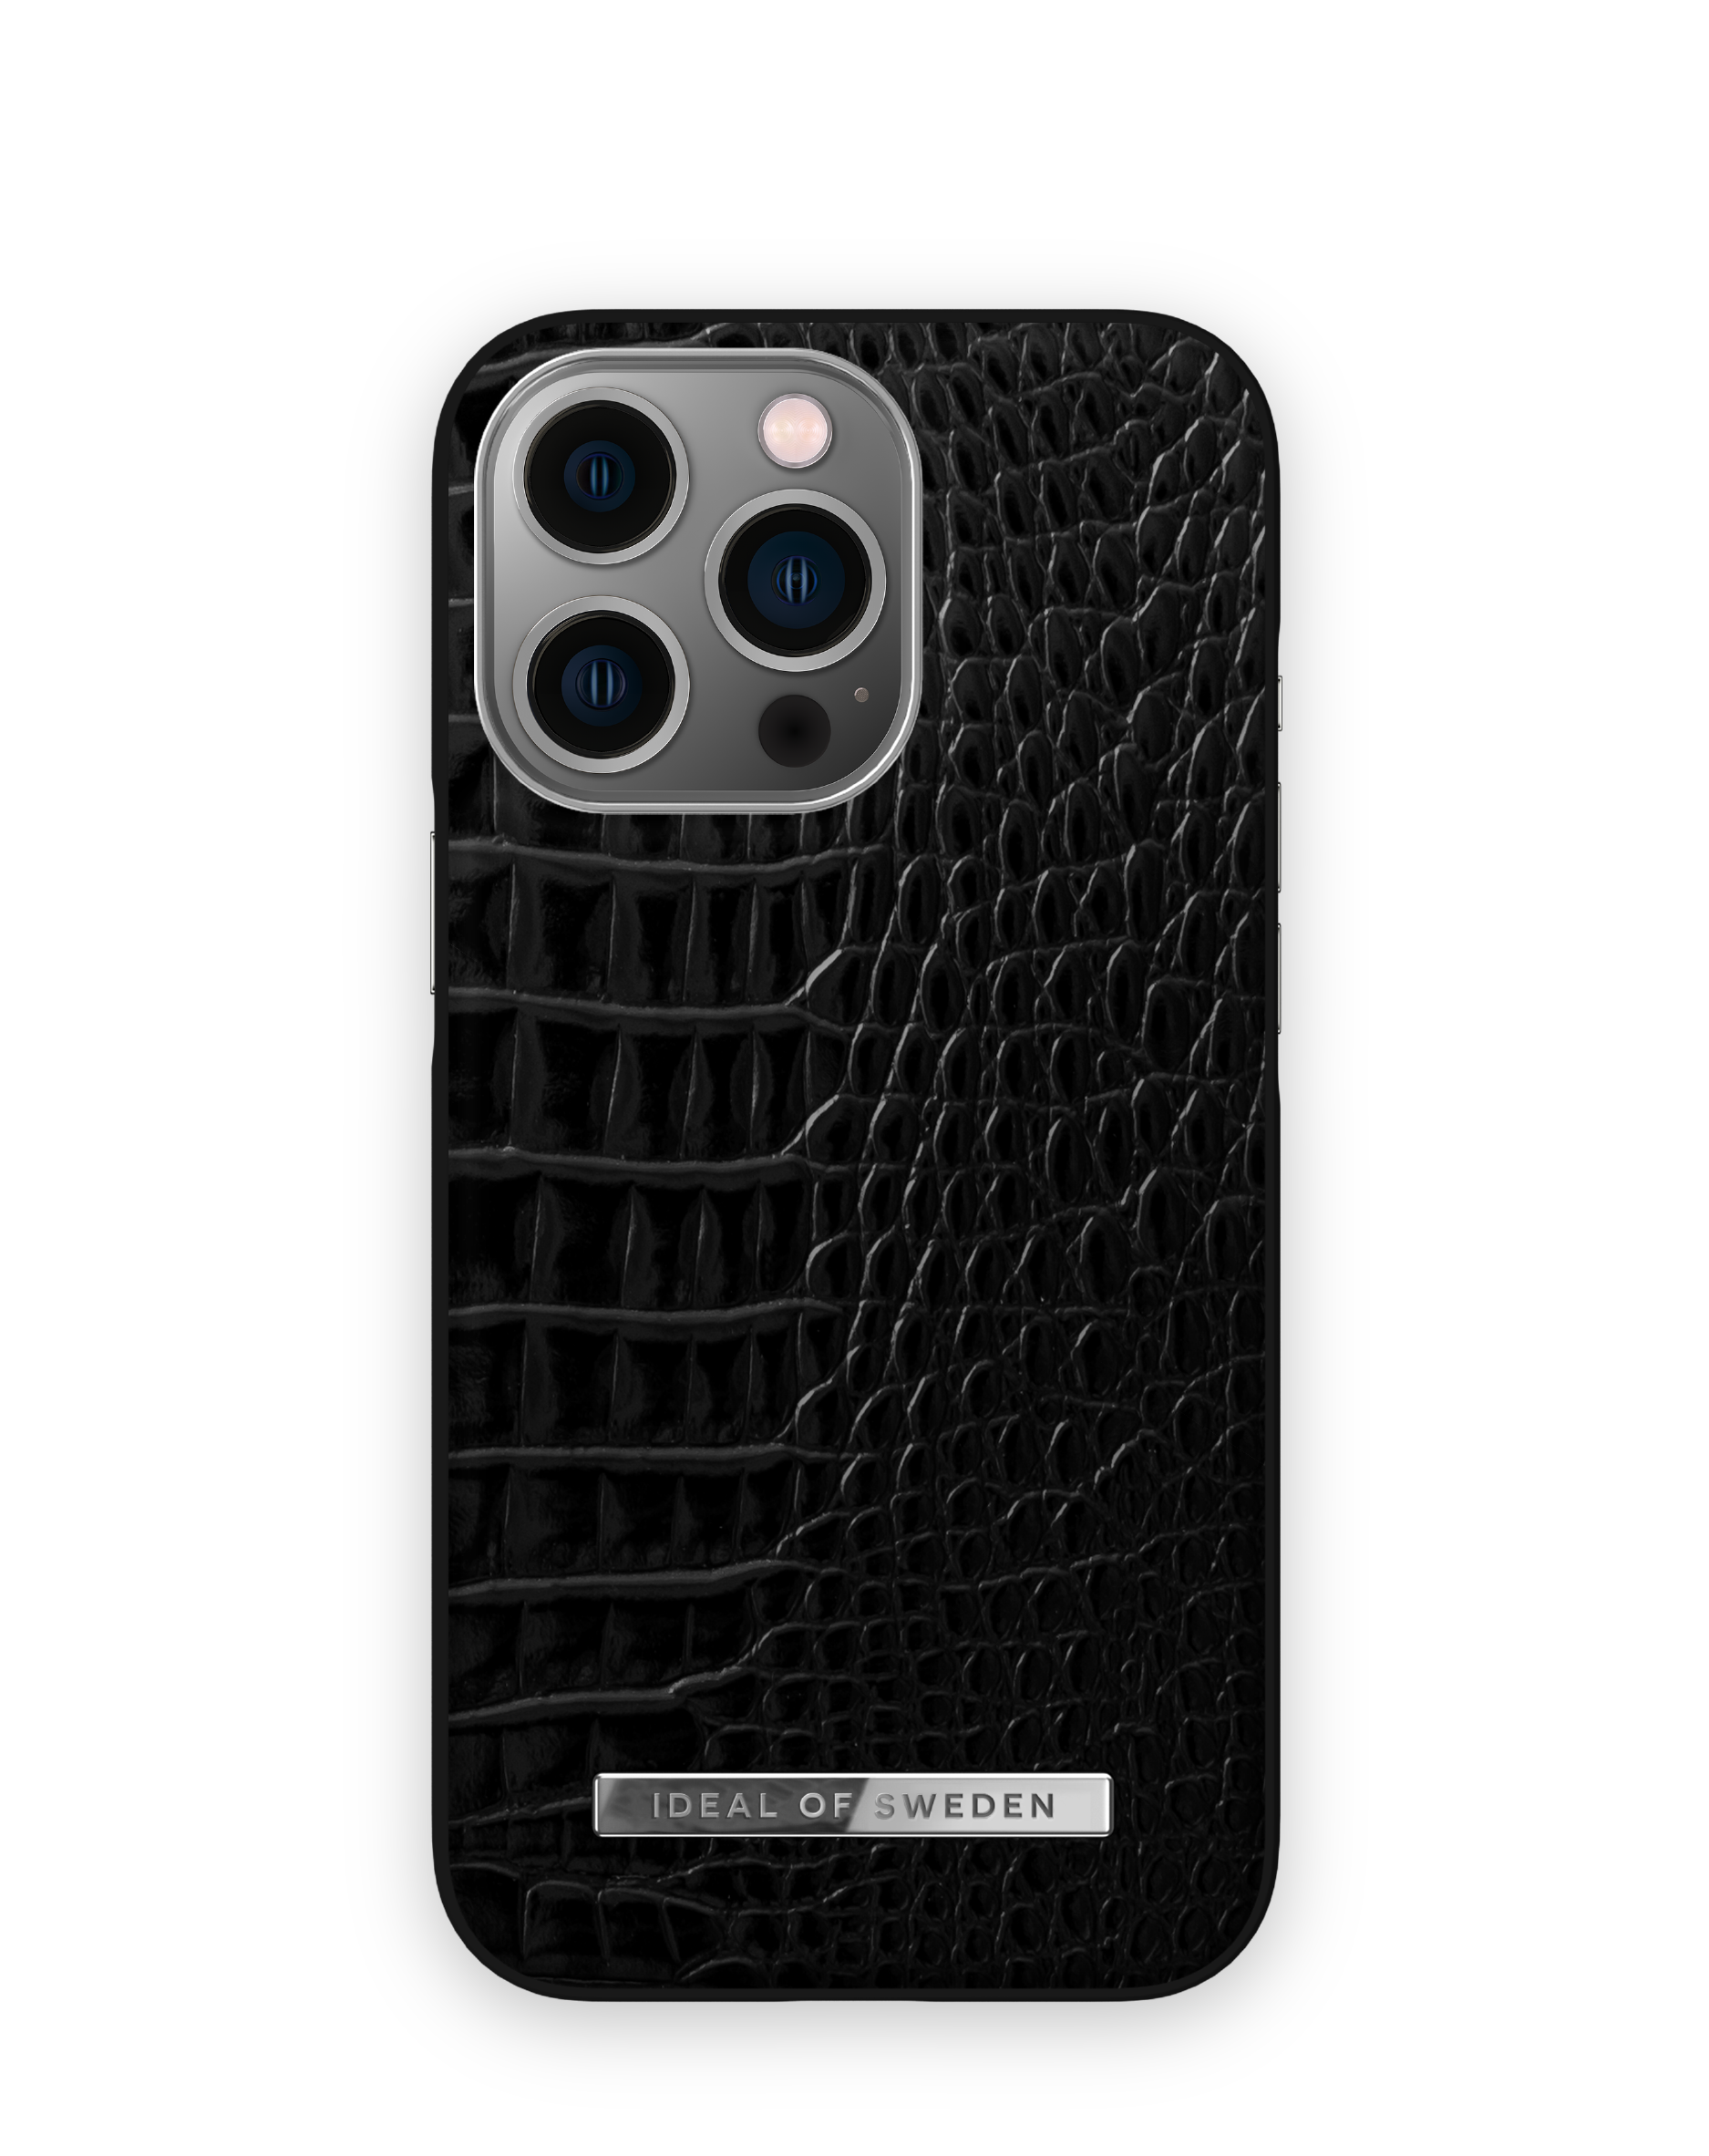 Neo - Recycled Silver IDACSS22-I2161P-306, Pro, 13 IDEAL iPhone SWEDEN Apple, Noir Backcover, OF Croco